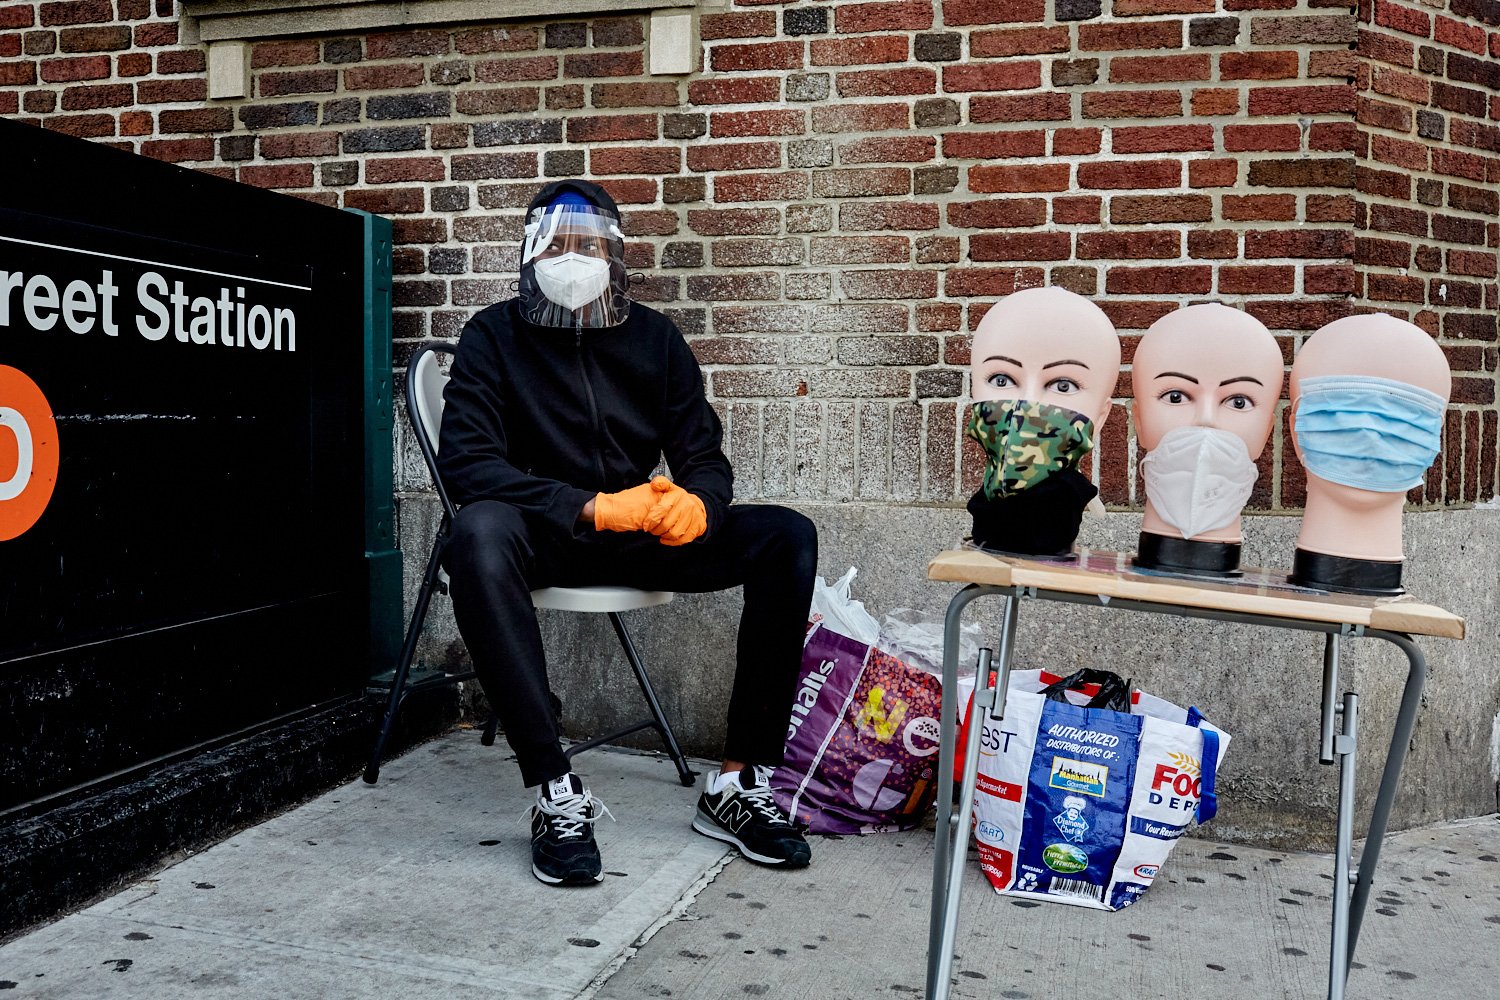 Man selling masks, sitting masked and faceshielded outside a subway station, by Stephen Speranza